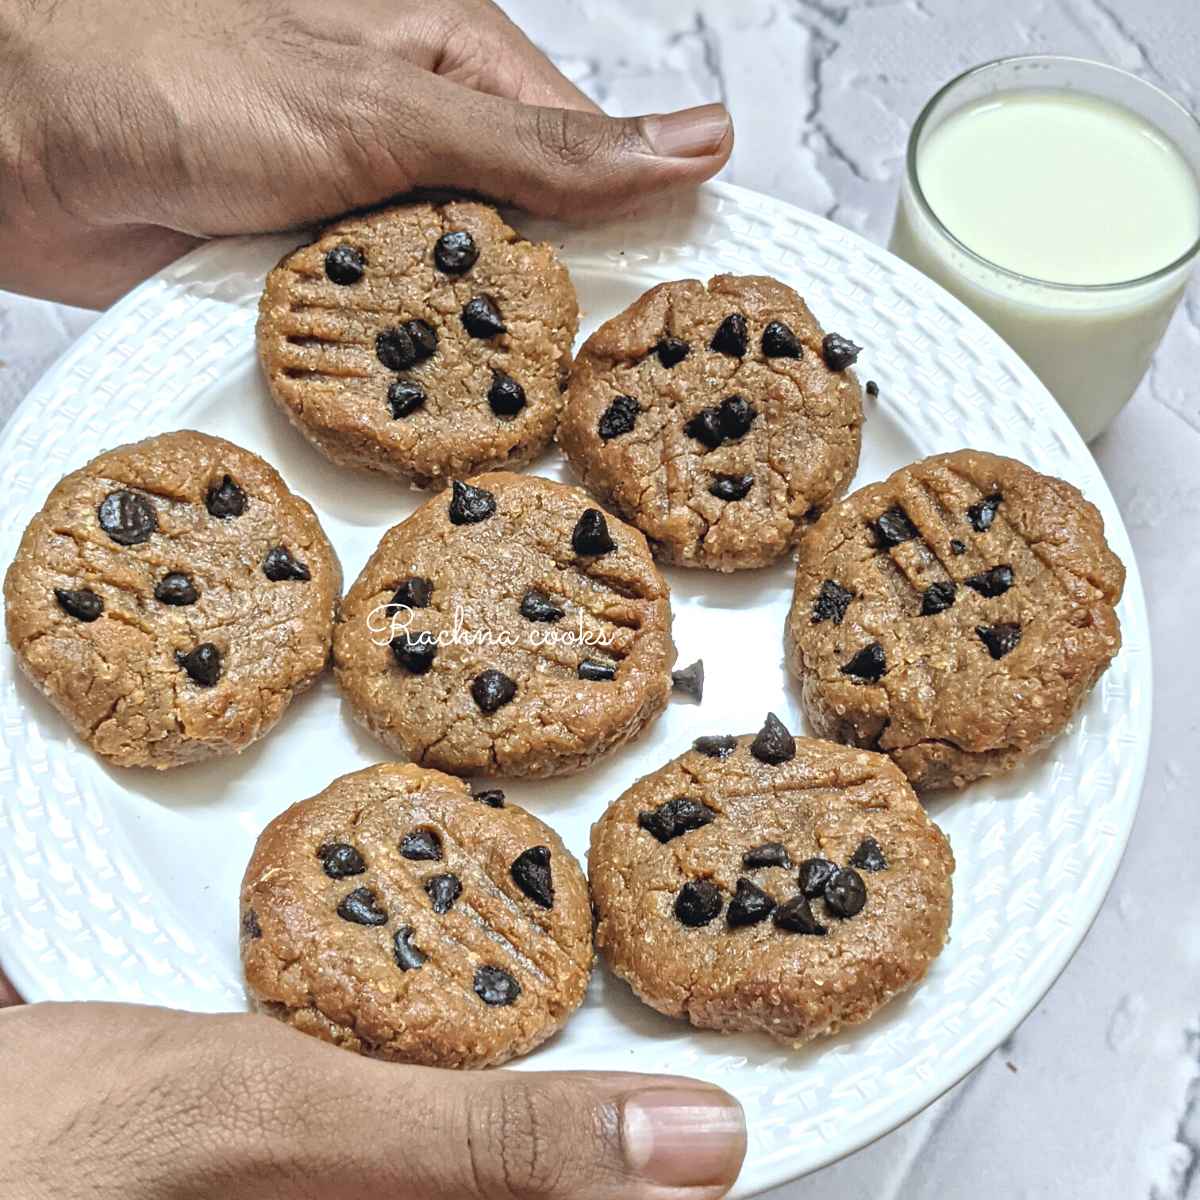 7 peanut butter chocolate chip cookies on a white plate held by hands with a glass of milk in the background.